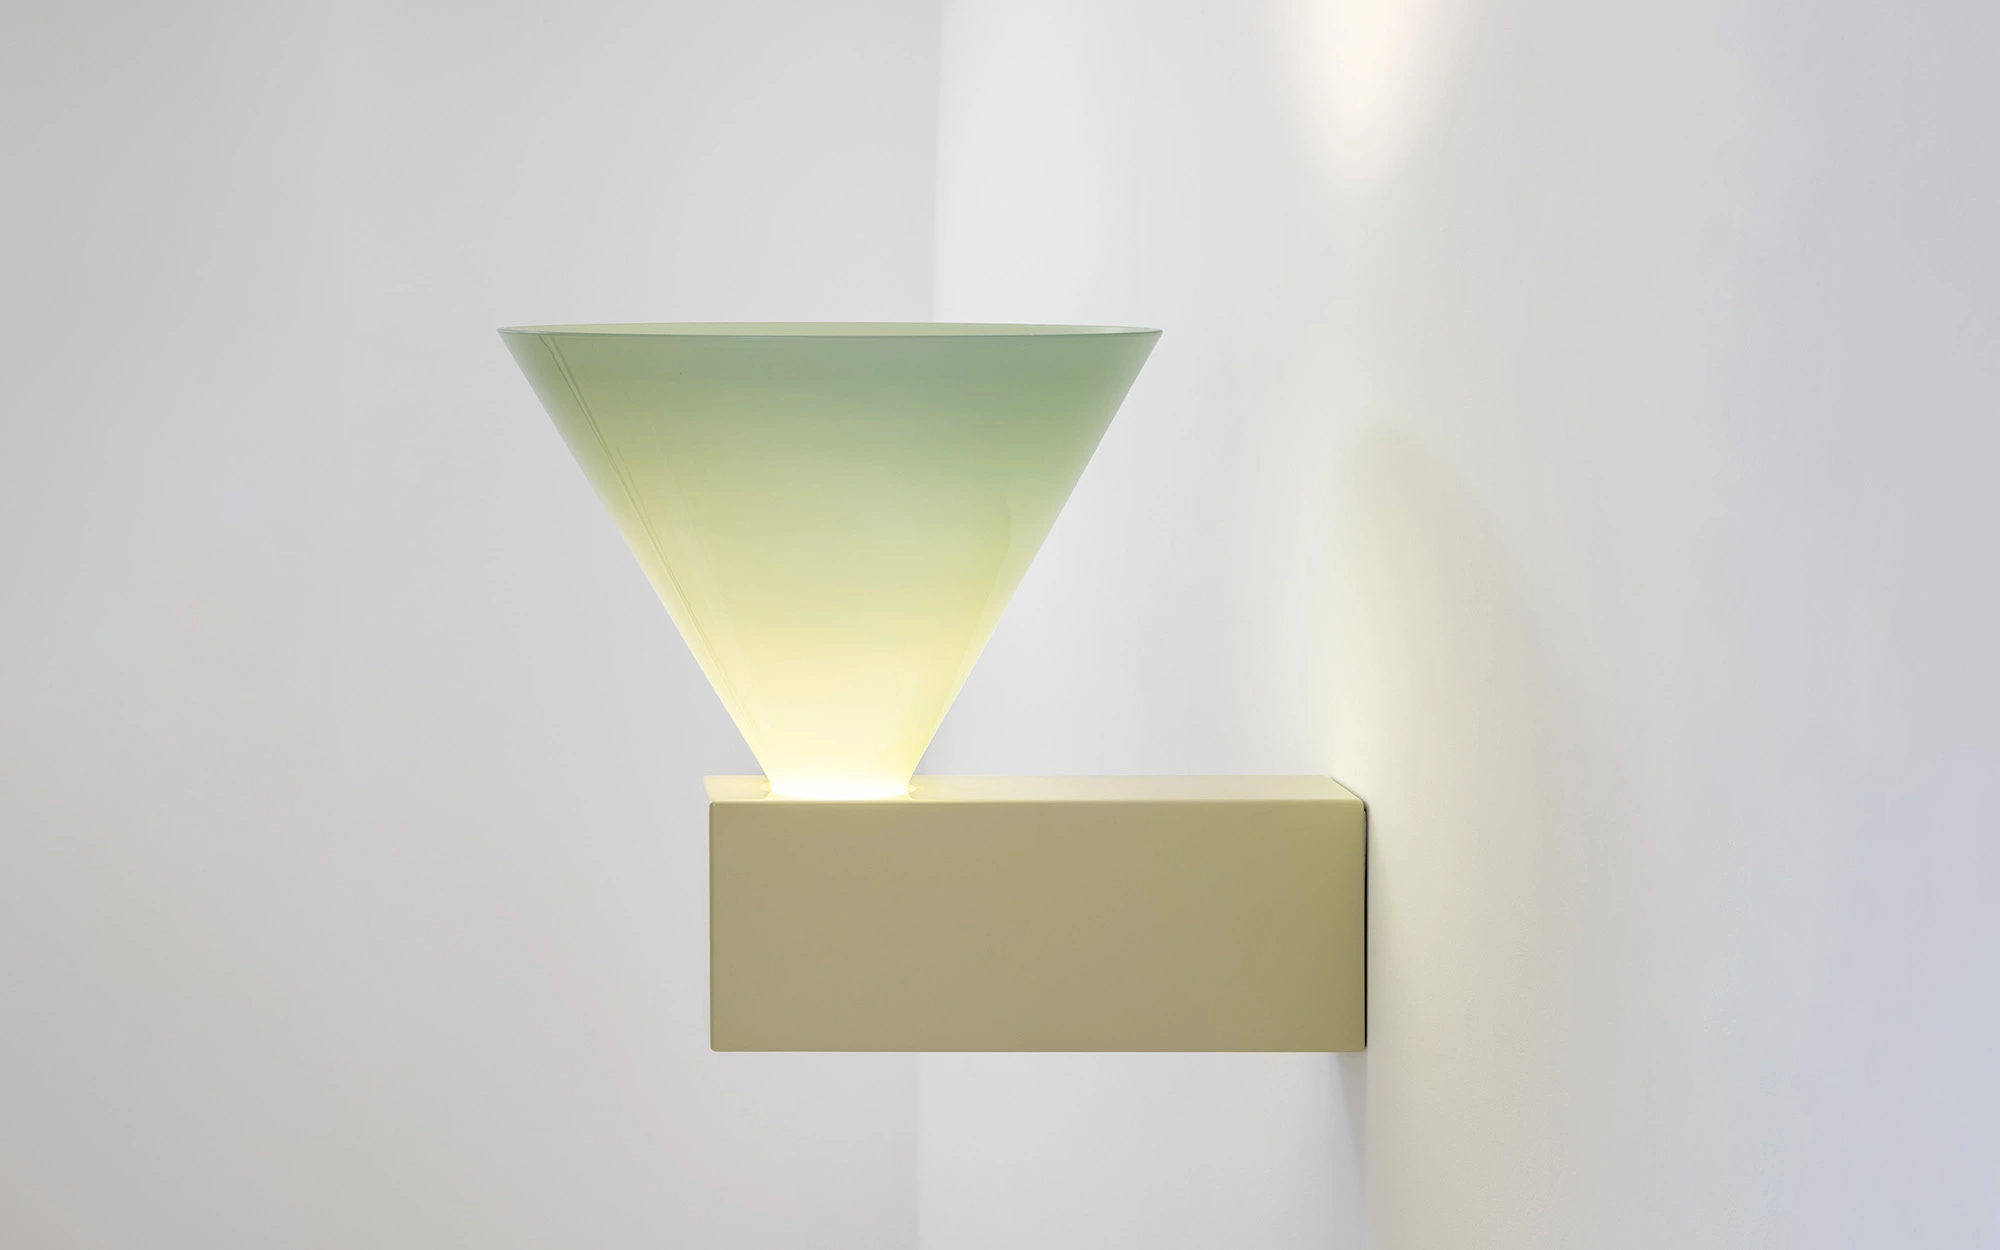 Signal W MONOCHROMATIC - Edward and Jay Barber and Osgerby - Wall light - Galerie kreo